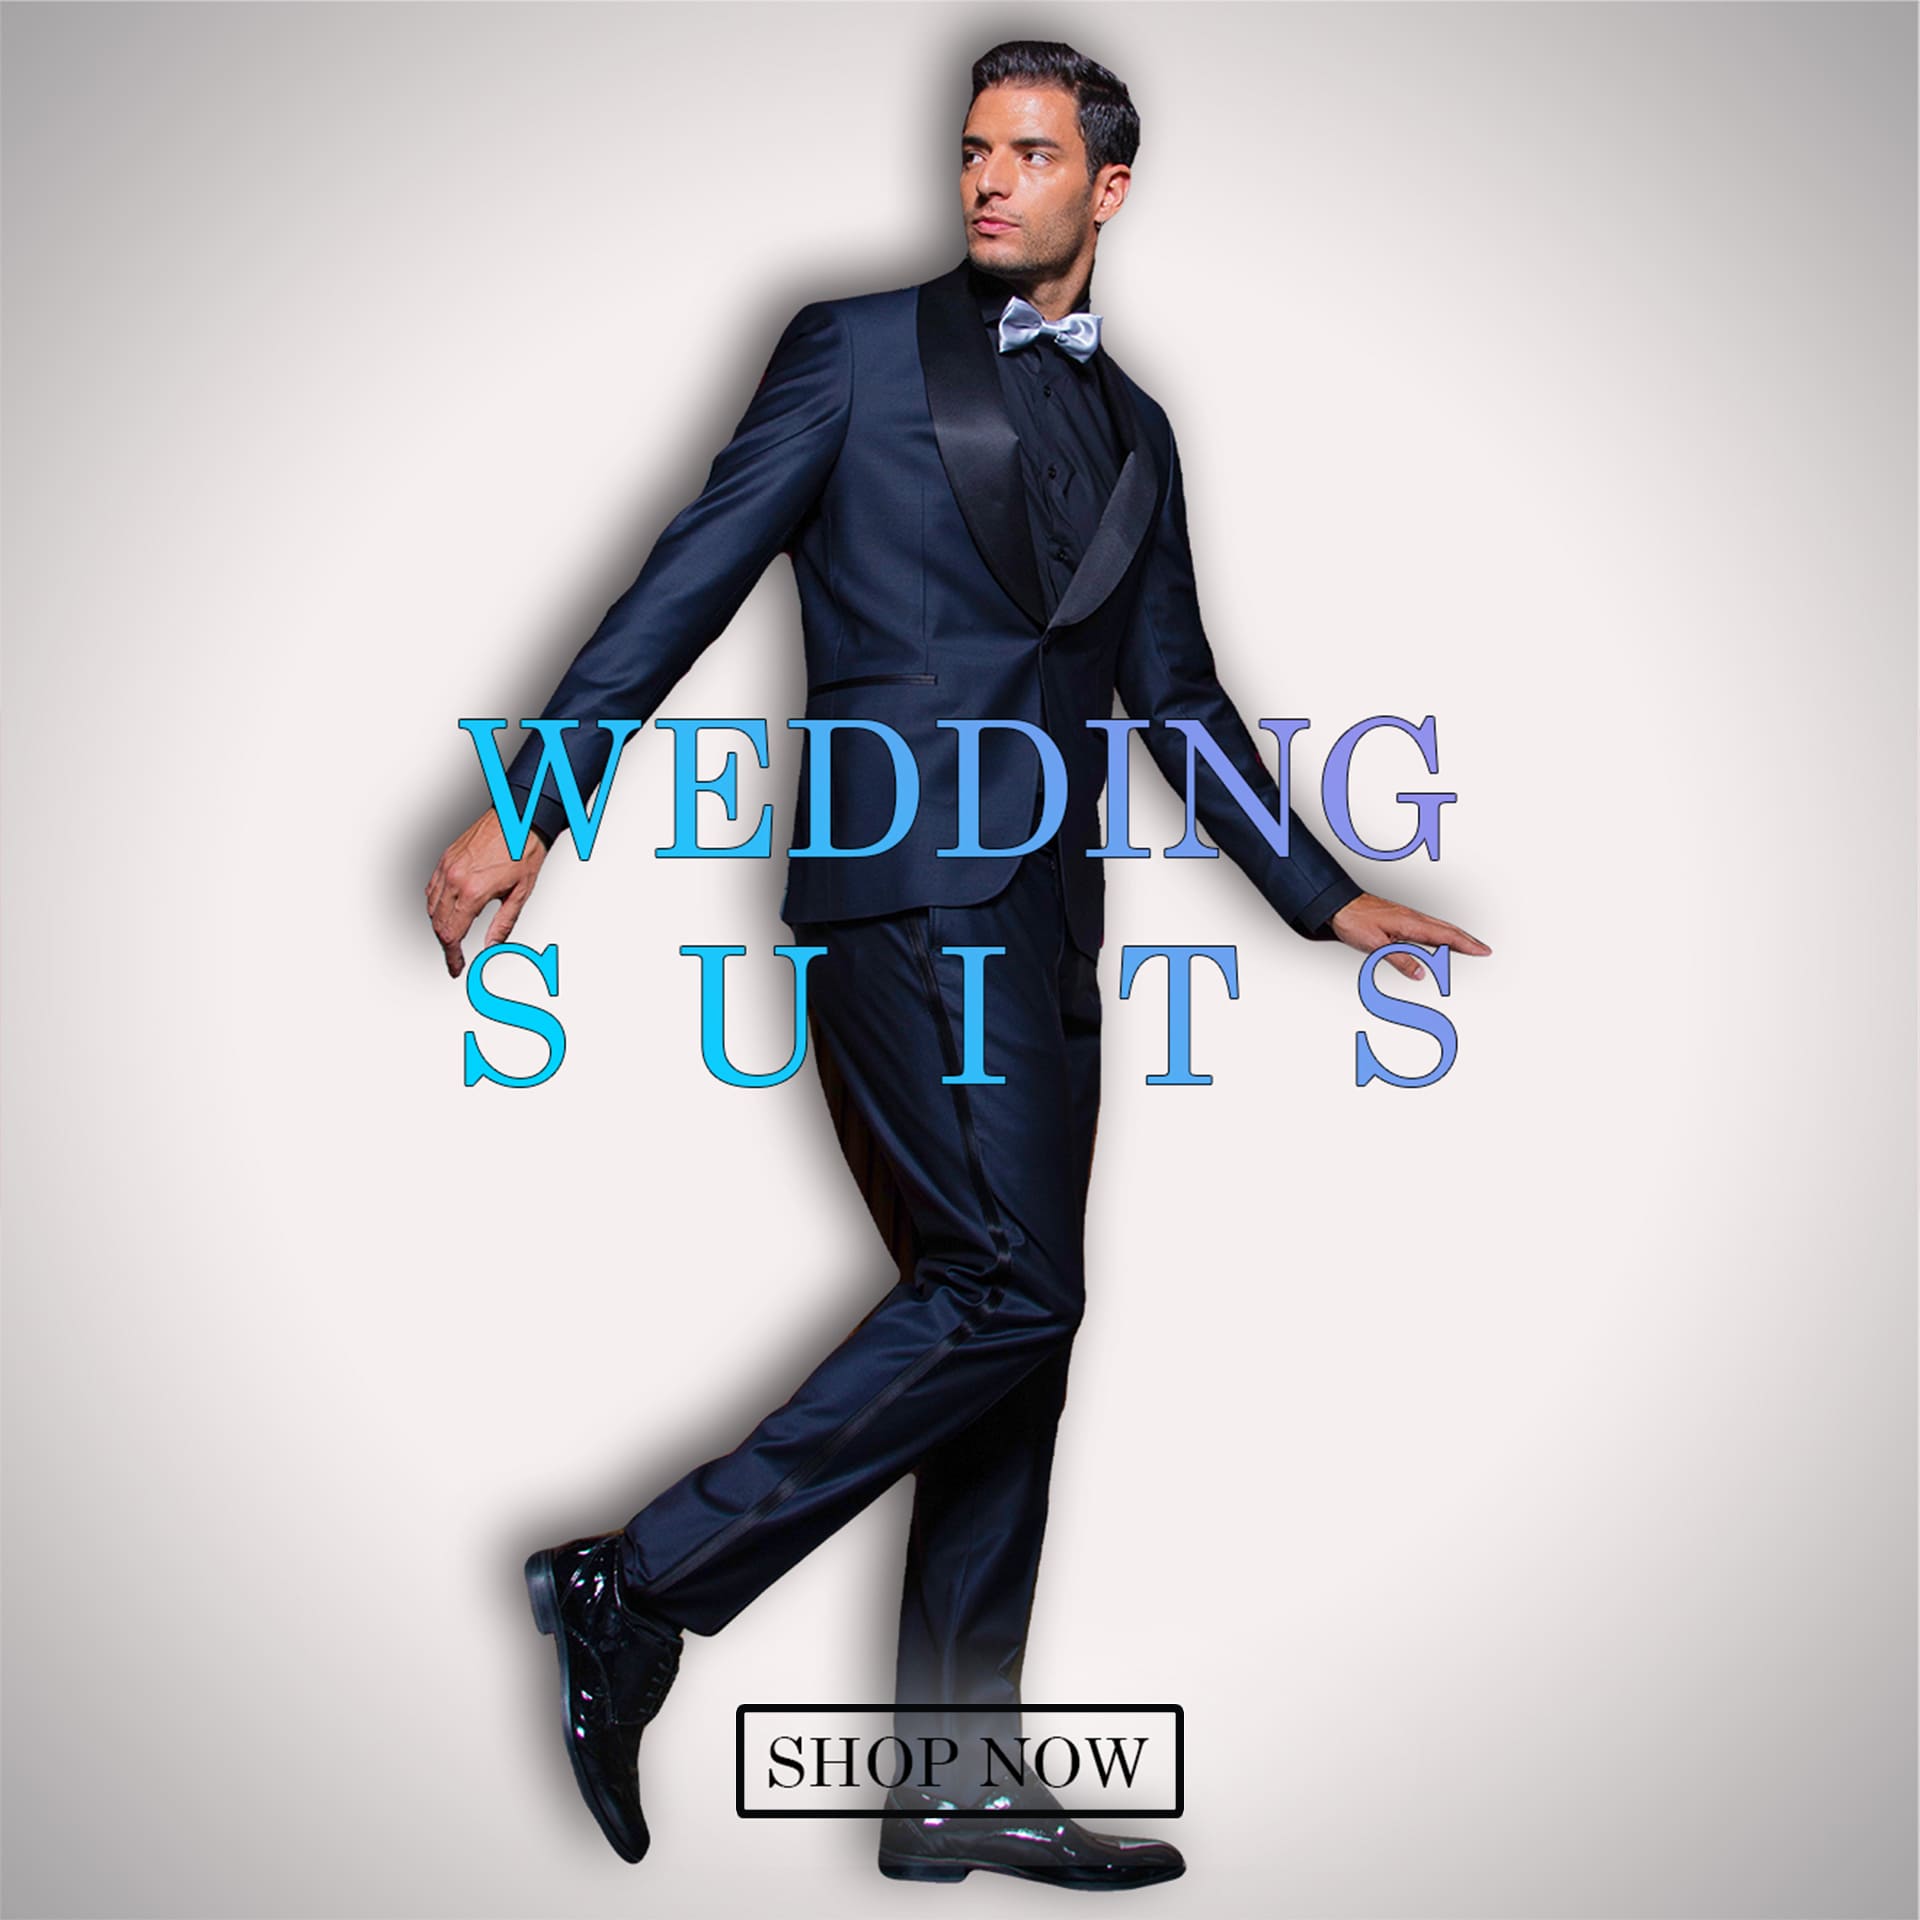 WEDDING SUITS MOBILE